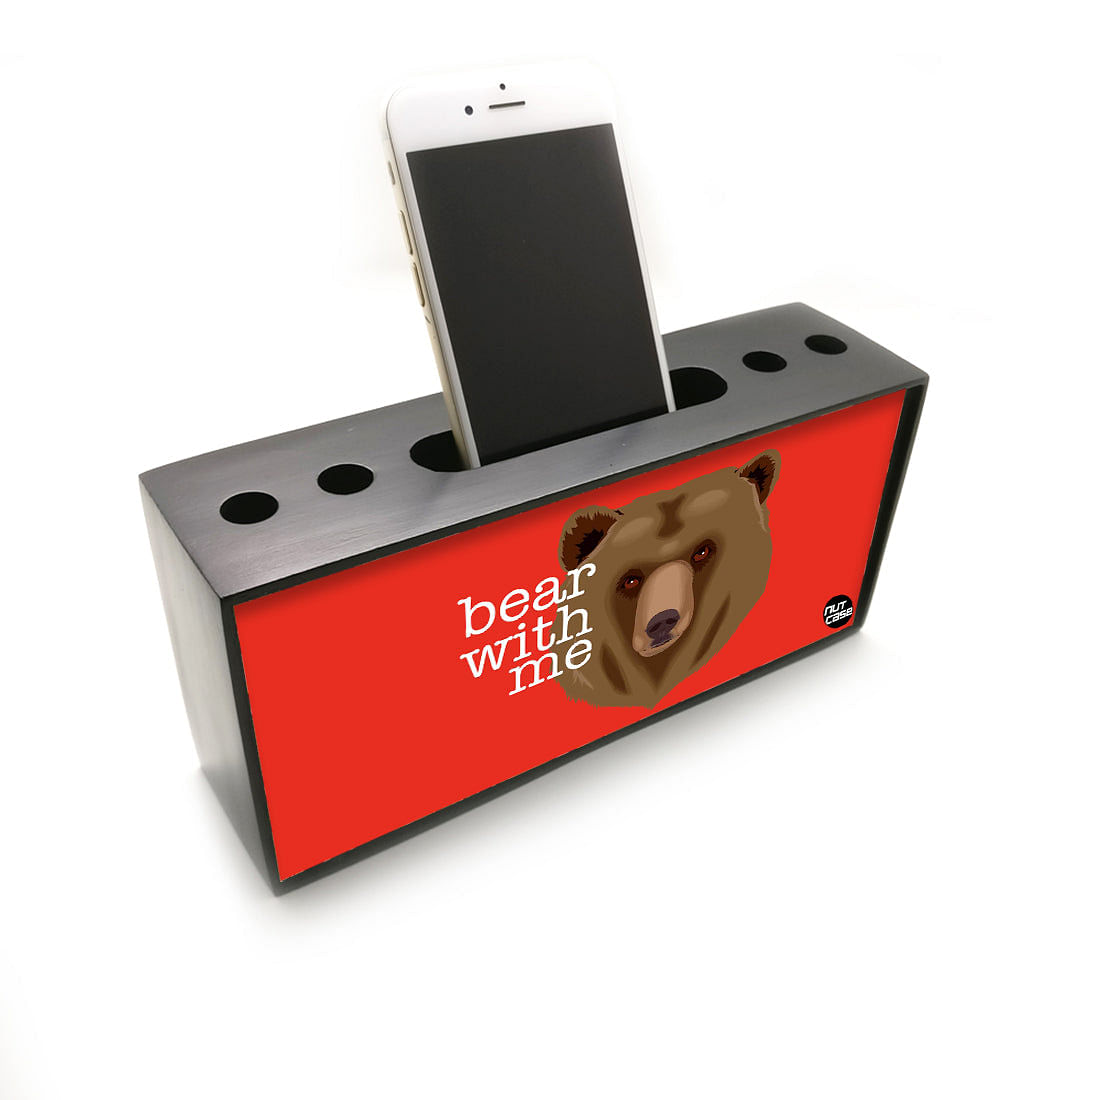 Small Mobile and Pen Holder Desk Organizer for Office Use - Bear Nutcase